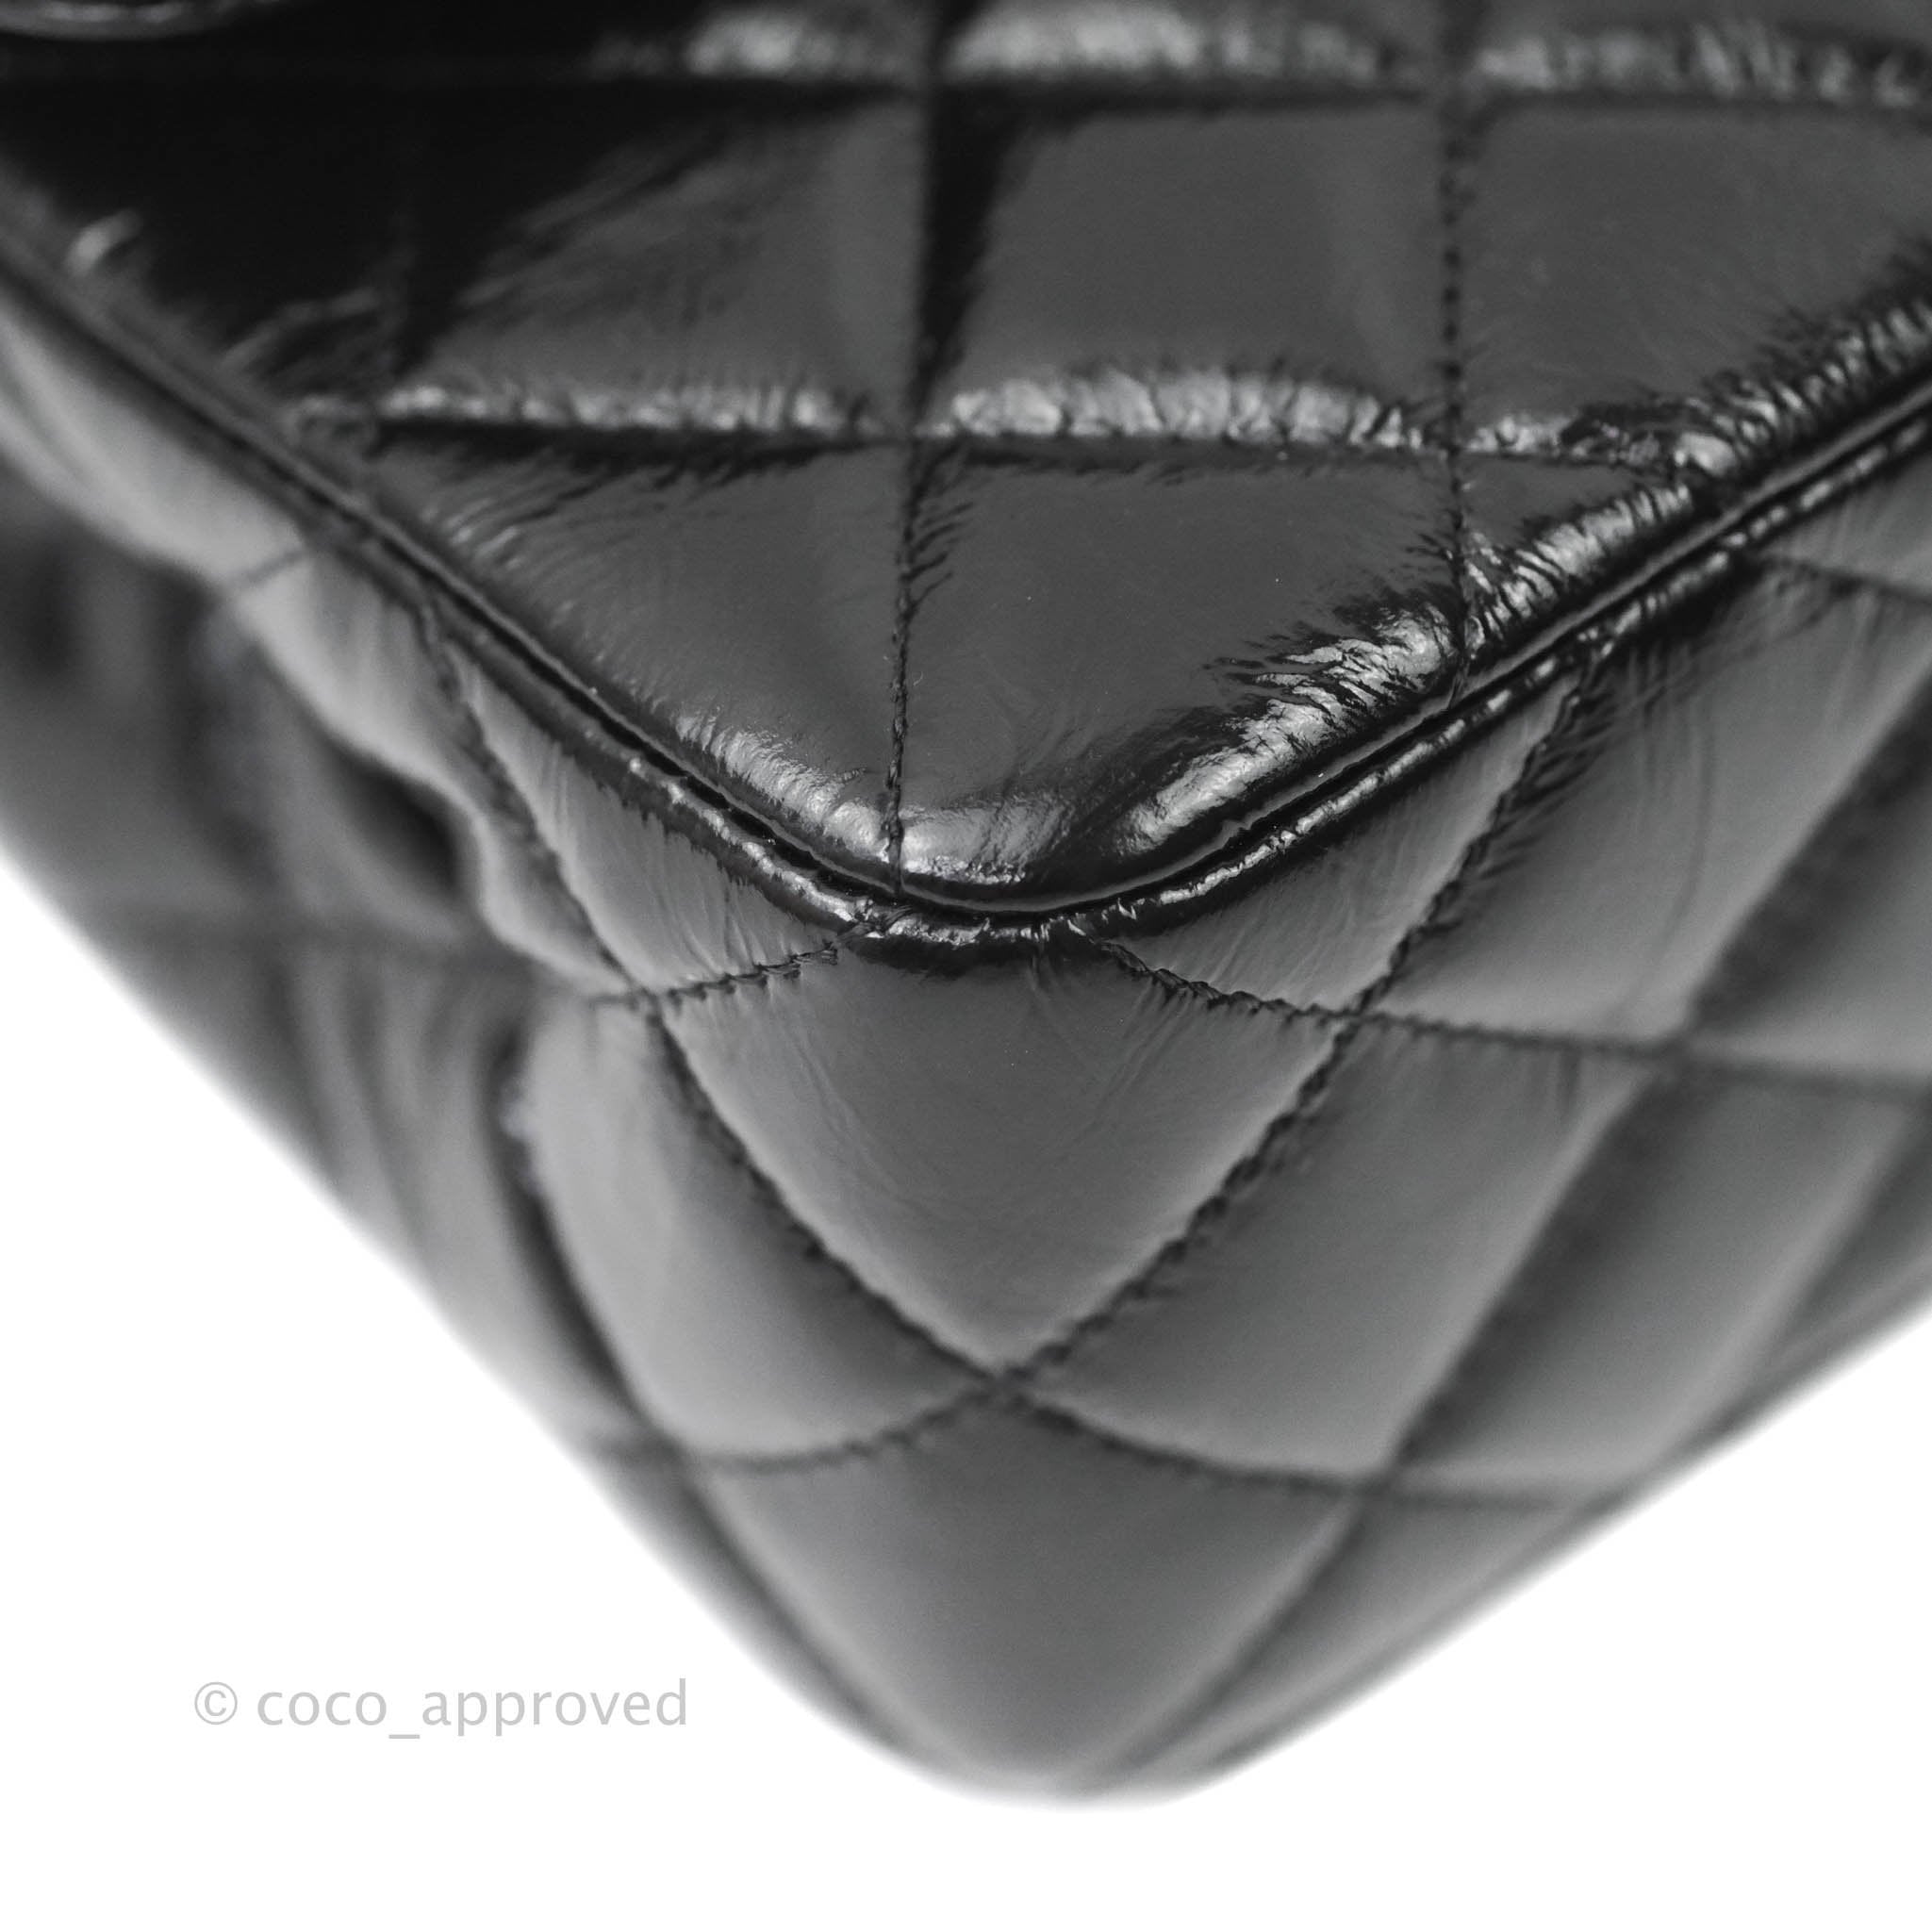 CHANEL Bag Quilted So Black Jumbo Classic Double Flap Calfskin